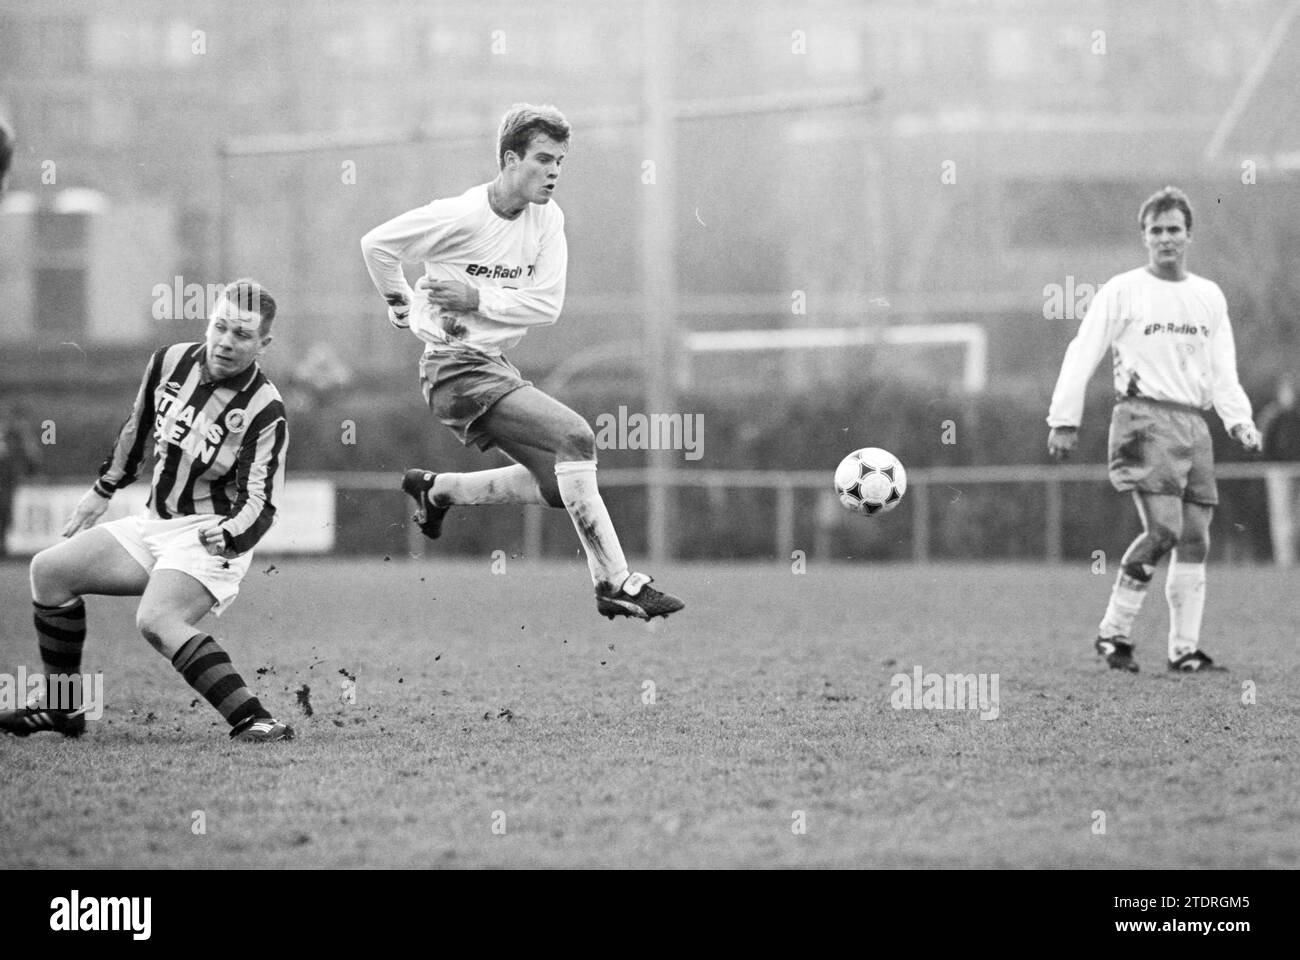 Football, Fulmars - RCH, 10-12-1994, Whizgle News from the Past, Tailored for the Future. Explore historical narratives, Dutch The Netherlands agency image with a modern perspective, bridging the gap between yesterday's events and tomorrow's insights. A timeless journey shaping the stories that shape our future Stock Photo